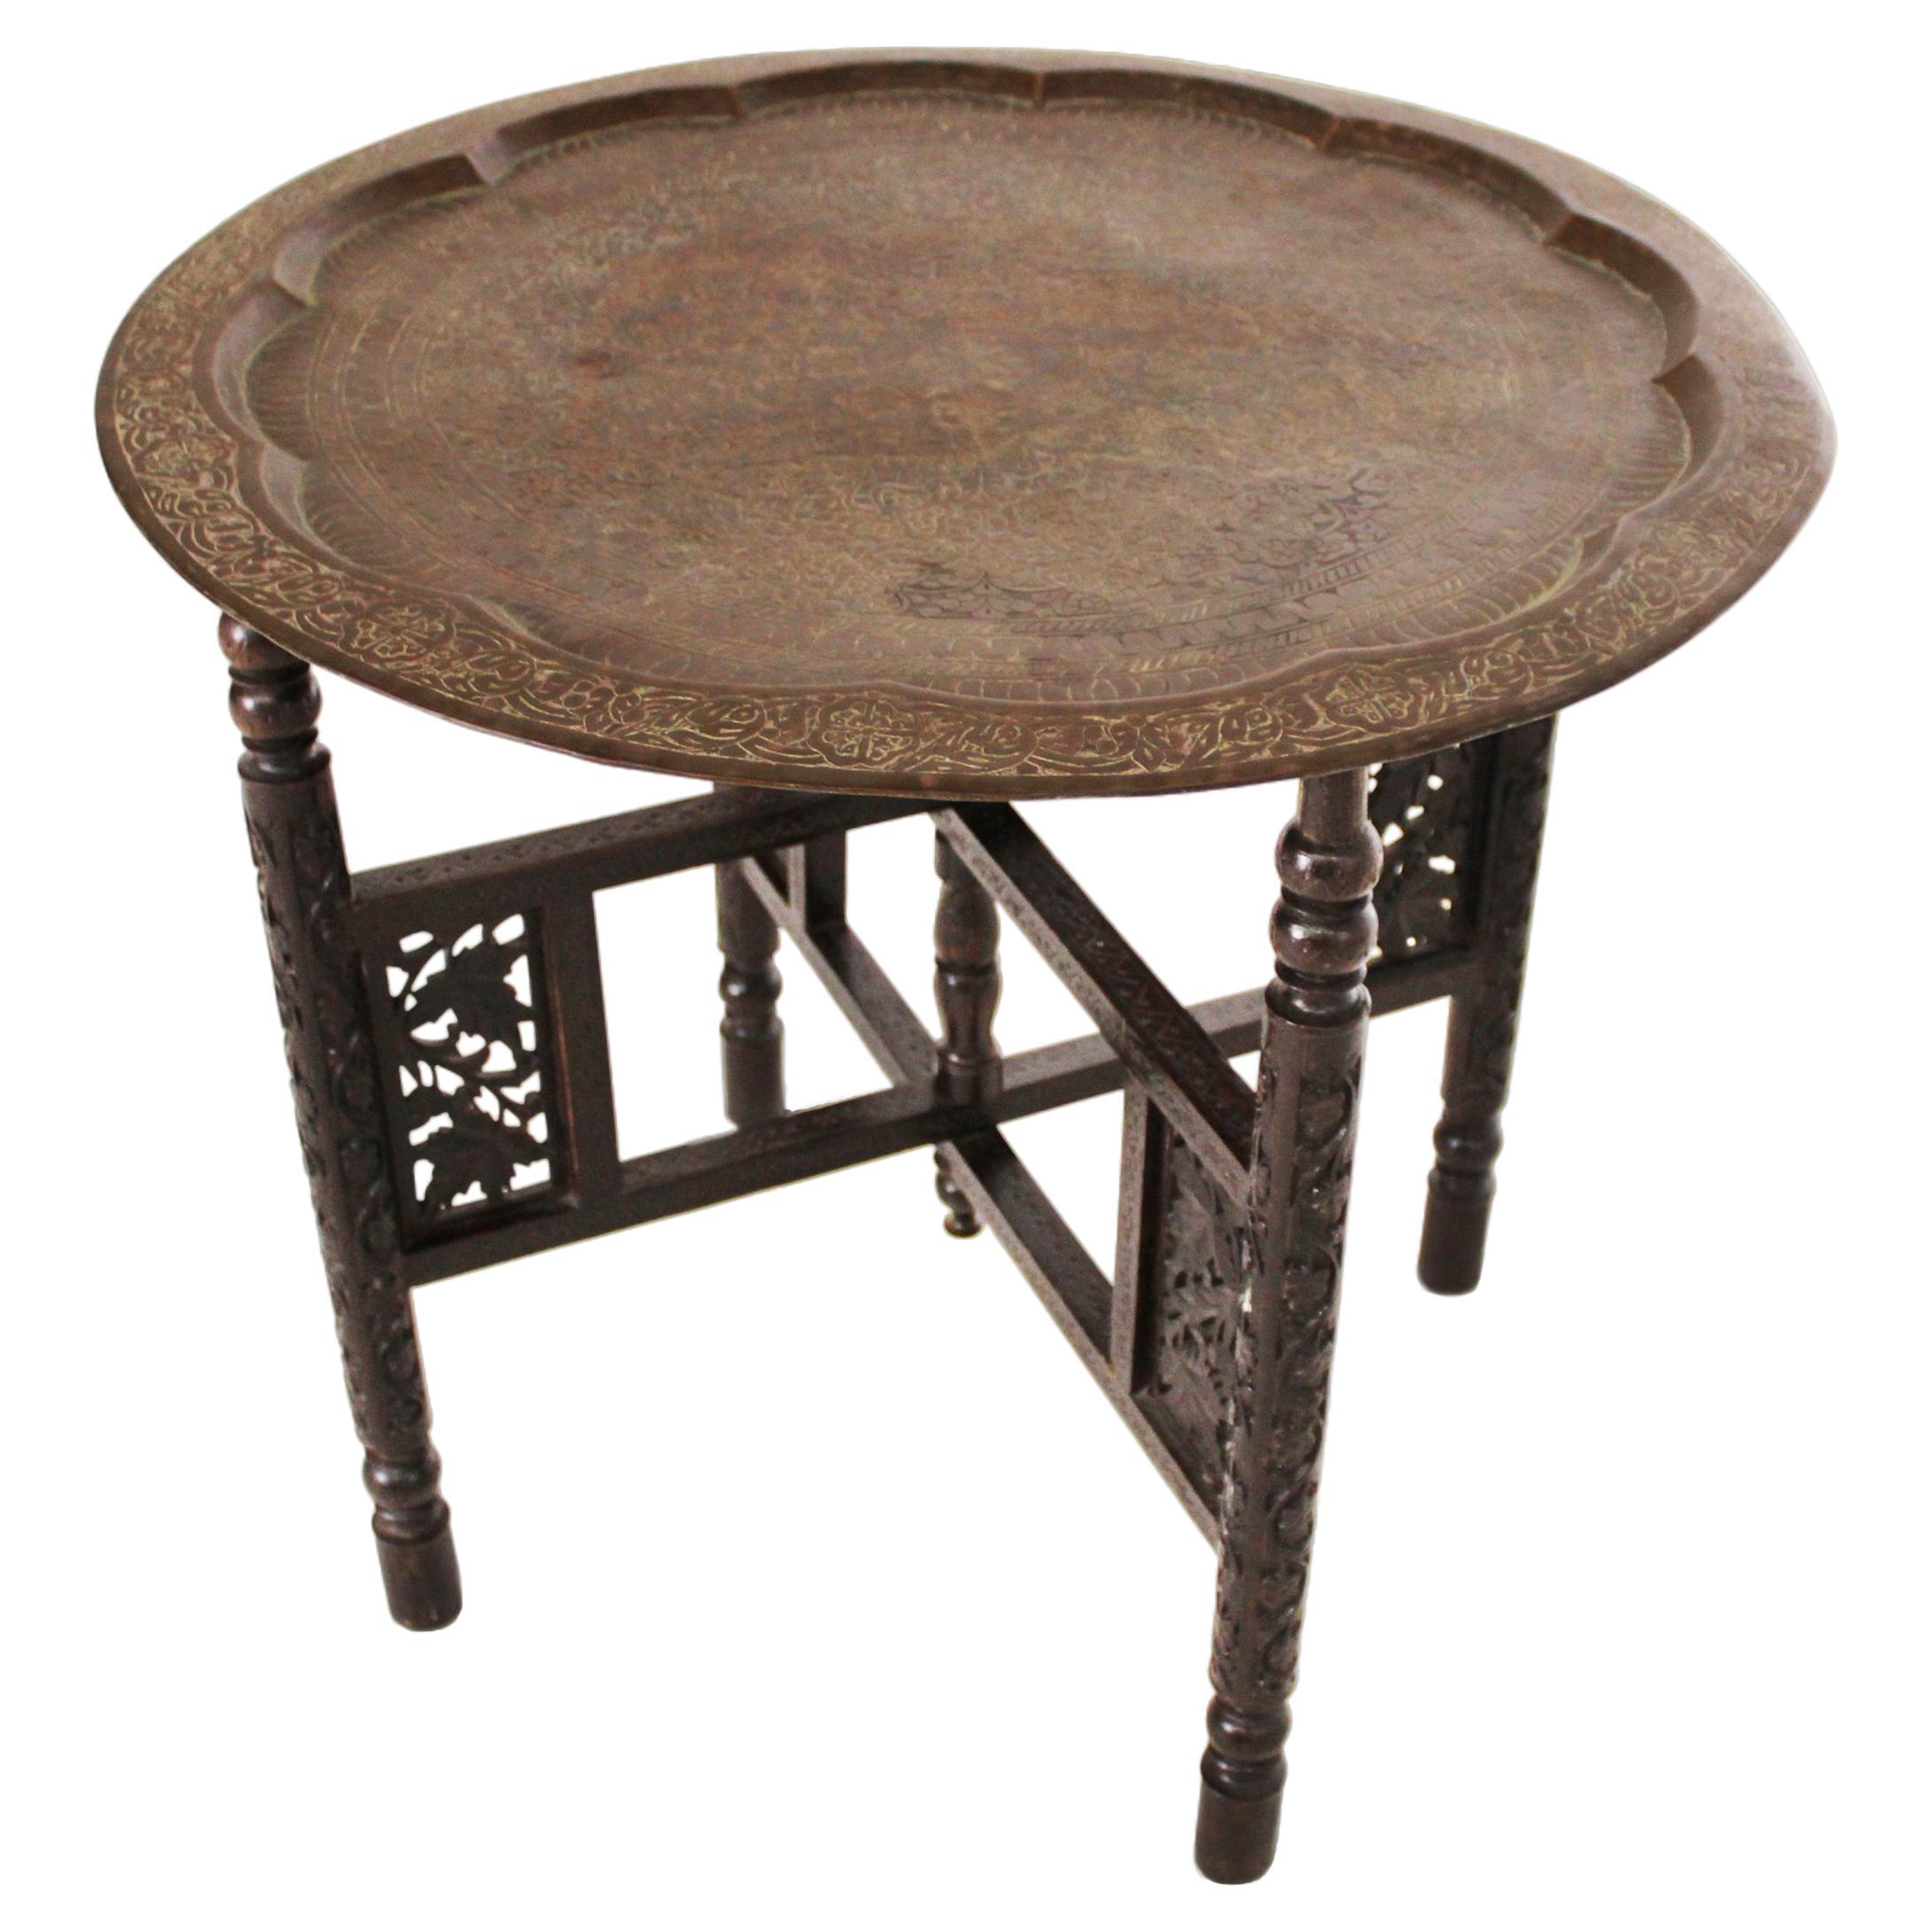 19th-century Anglo-Indian Brass Tray and Stand